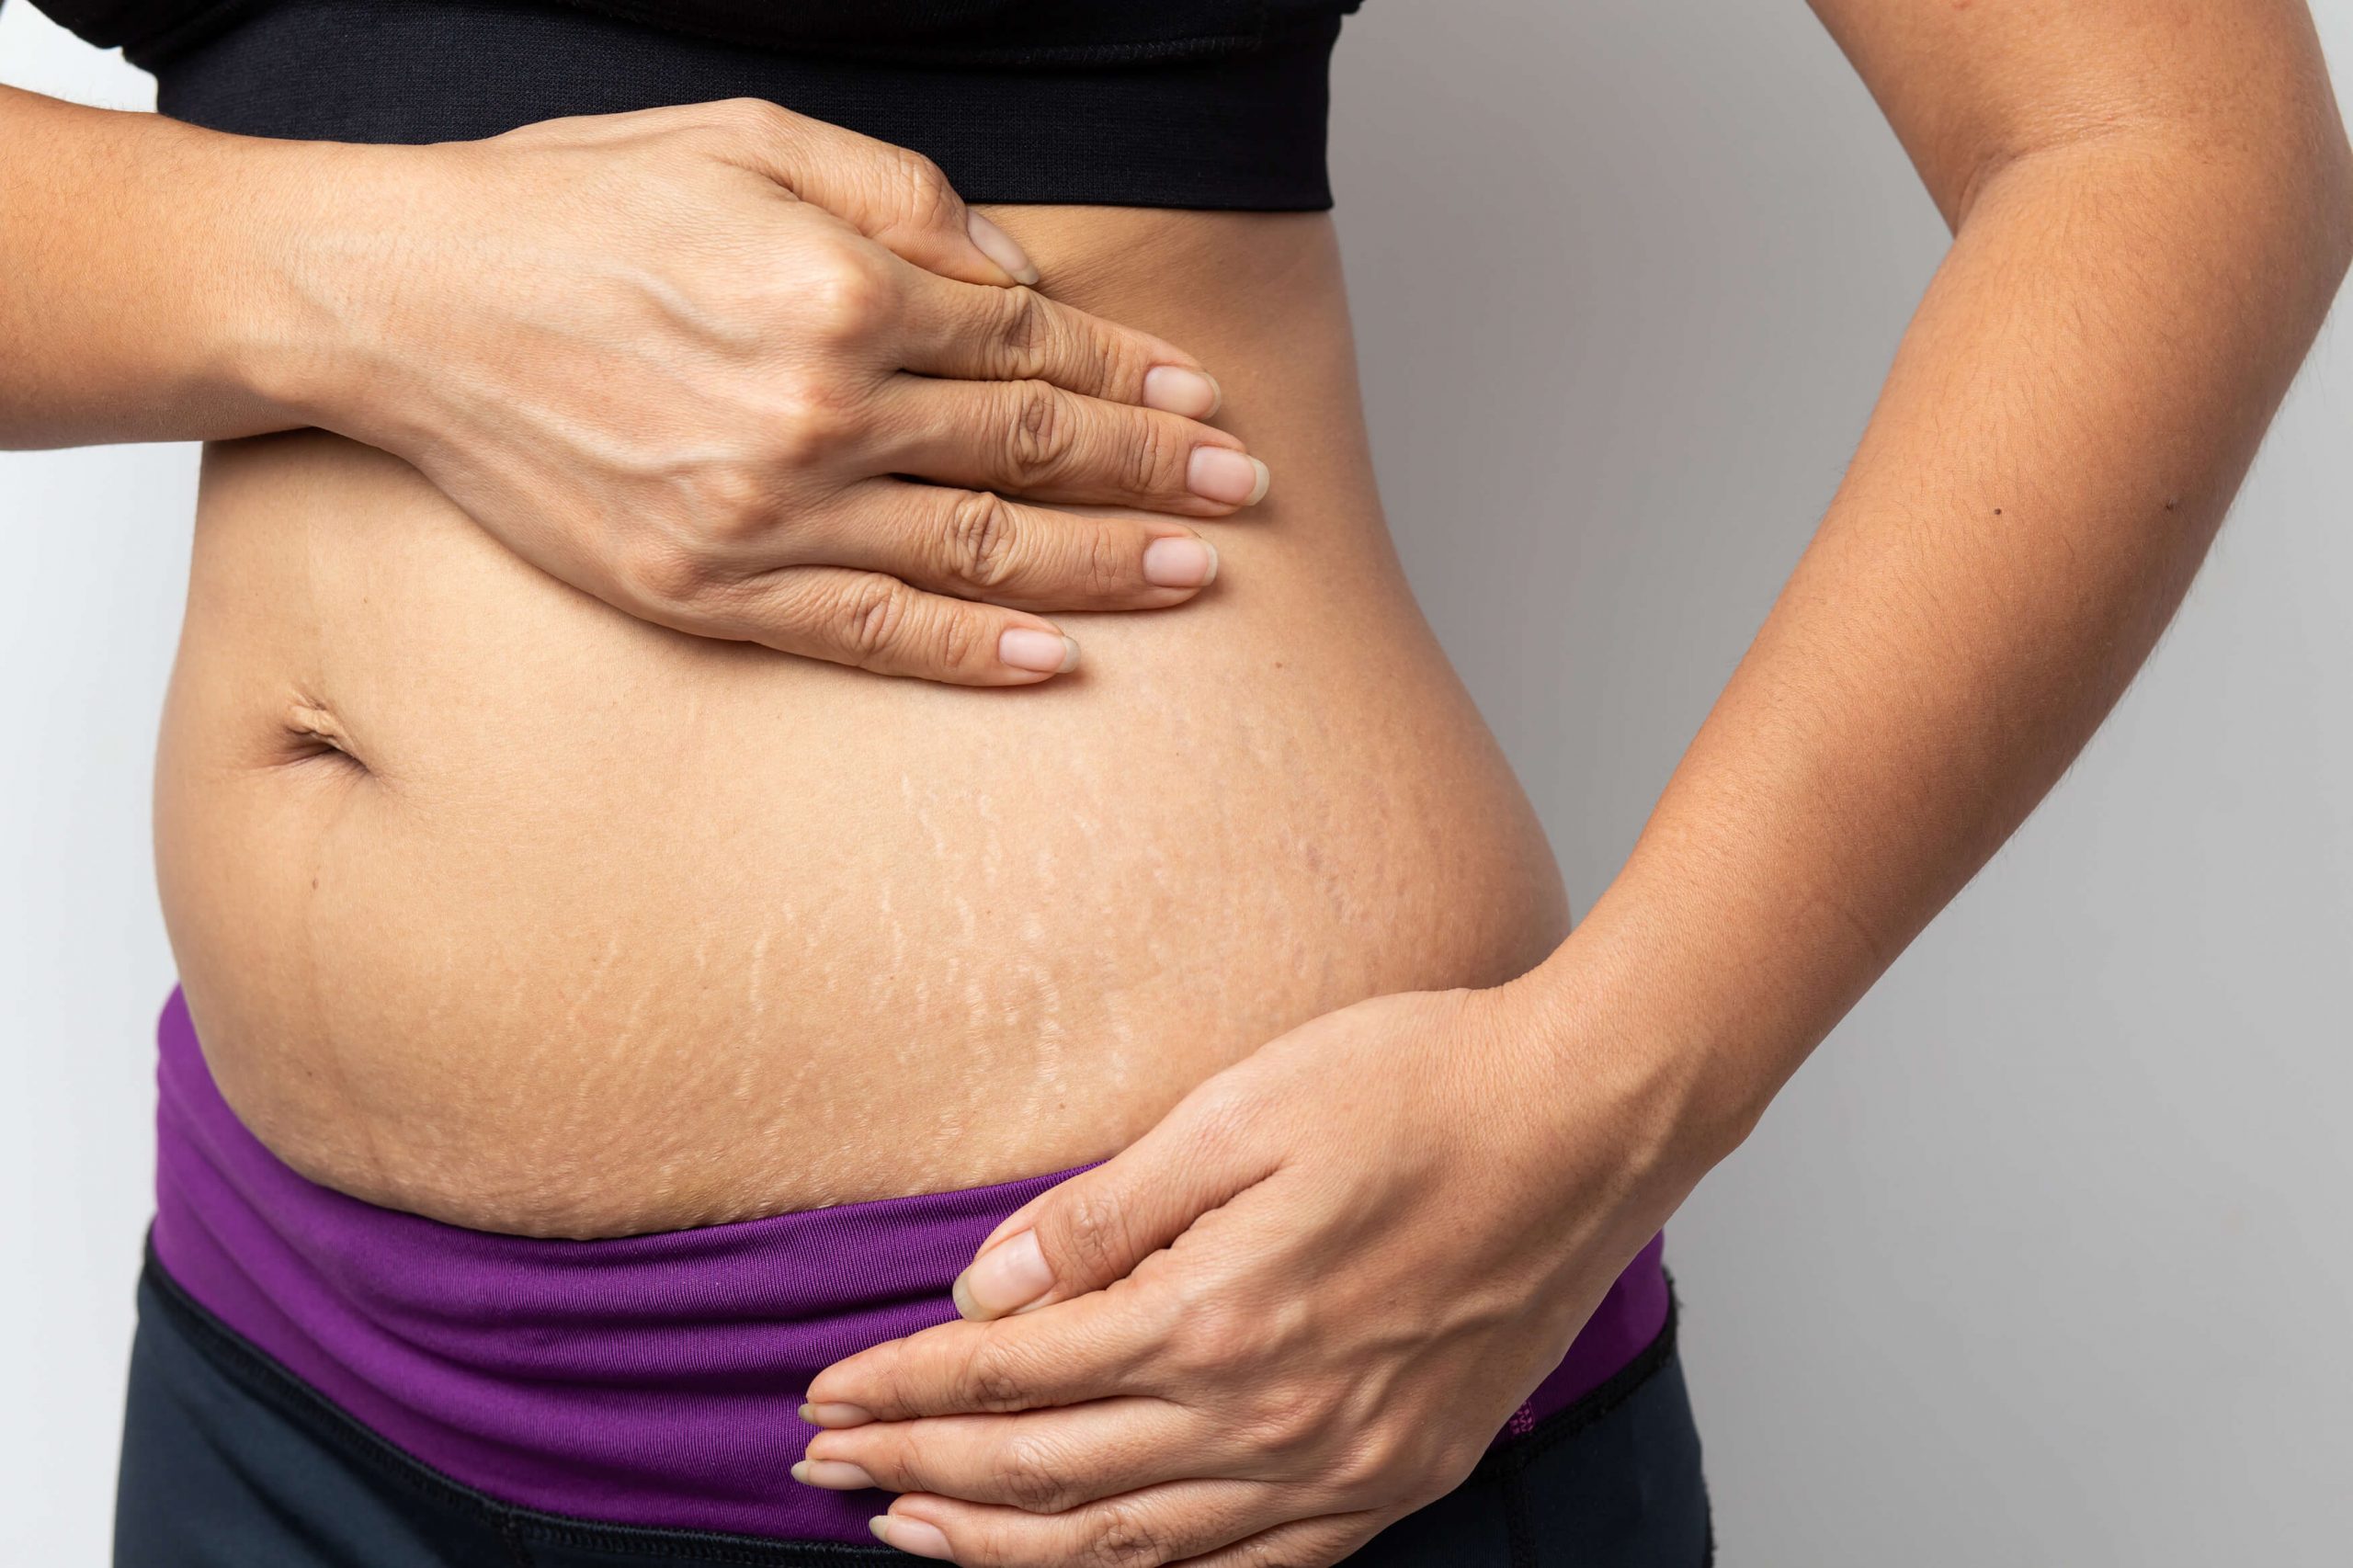 What You Need to Know About Post-Pregnancy Weight Loss - Weigh